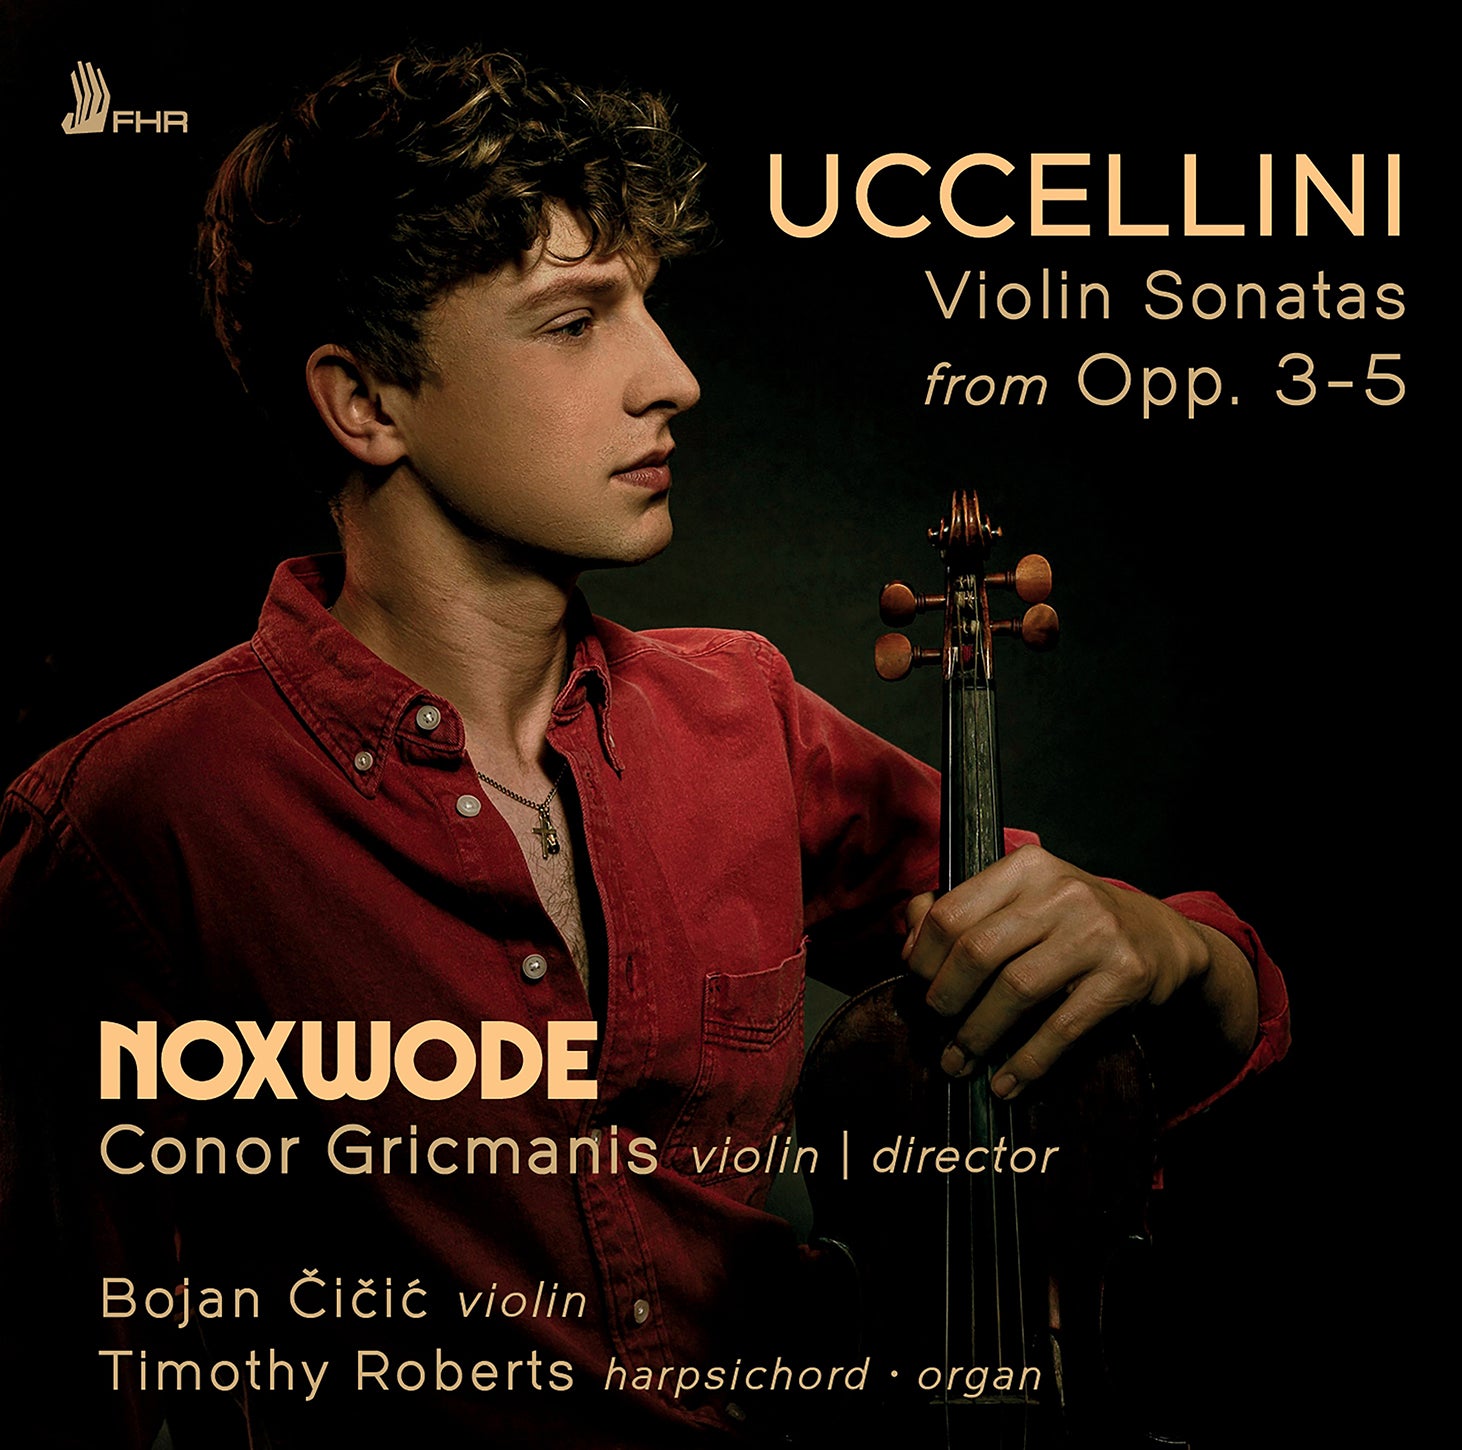 Uccellini: Sonatas from Opp. 3-5 on an Amati Violin (1572) / Gricmanis, Noxwode